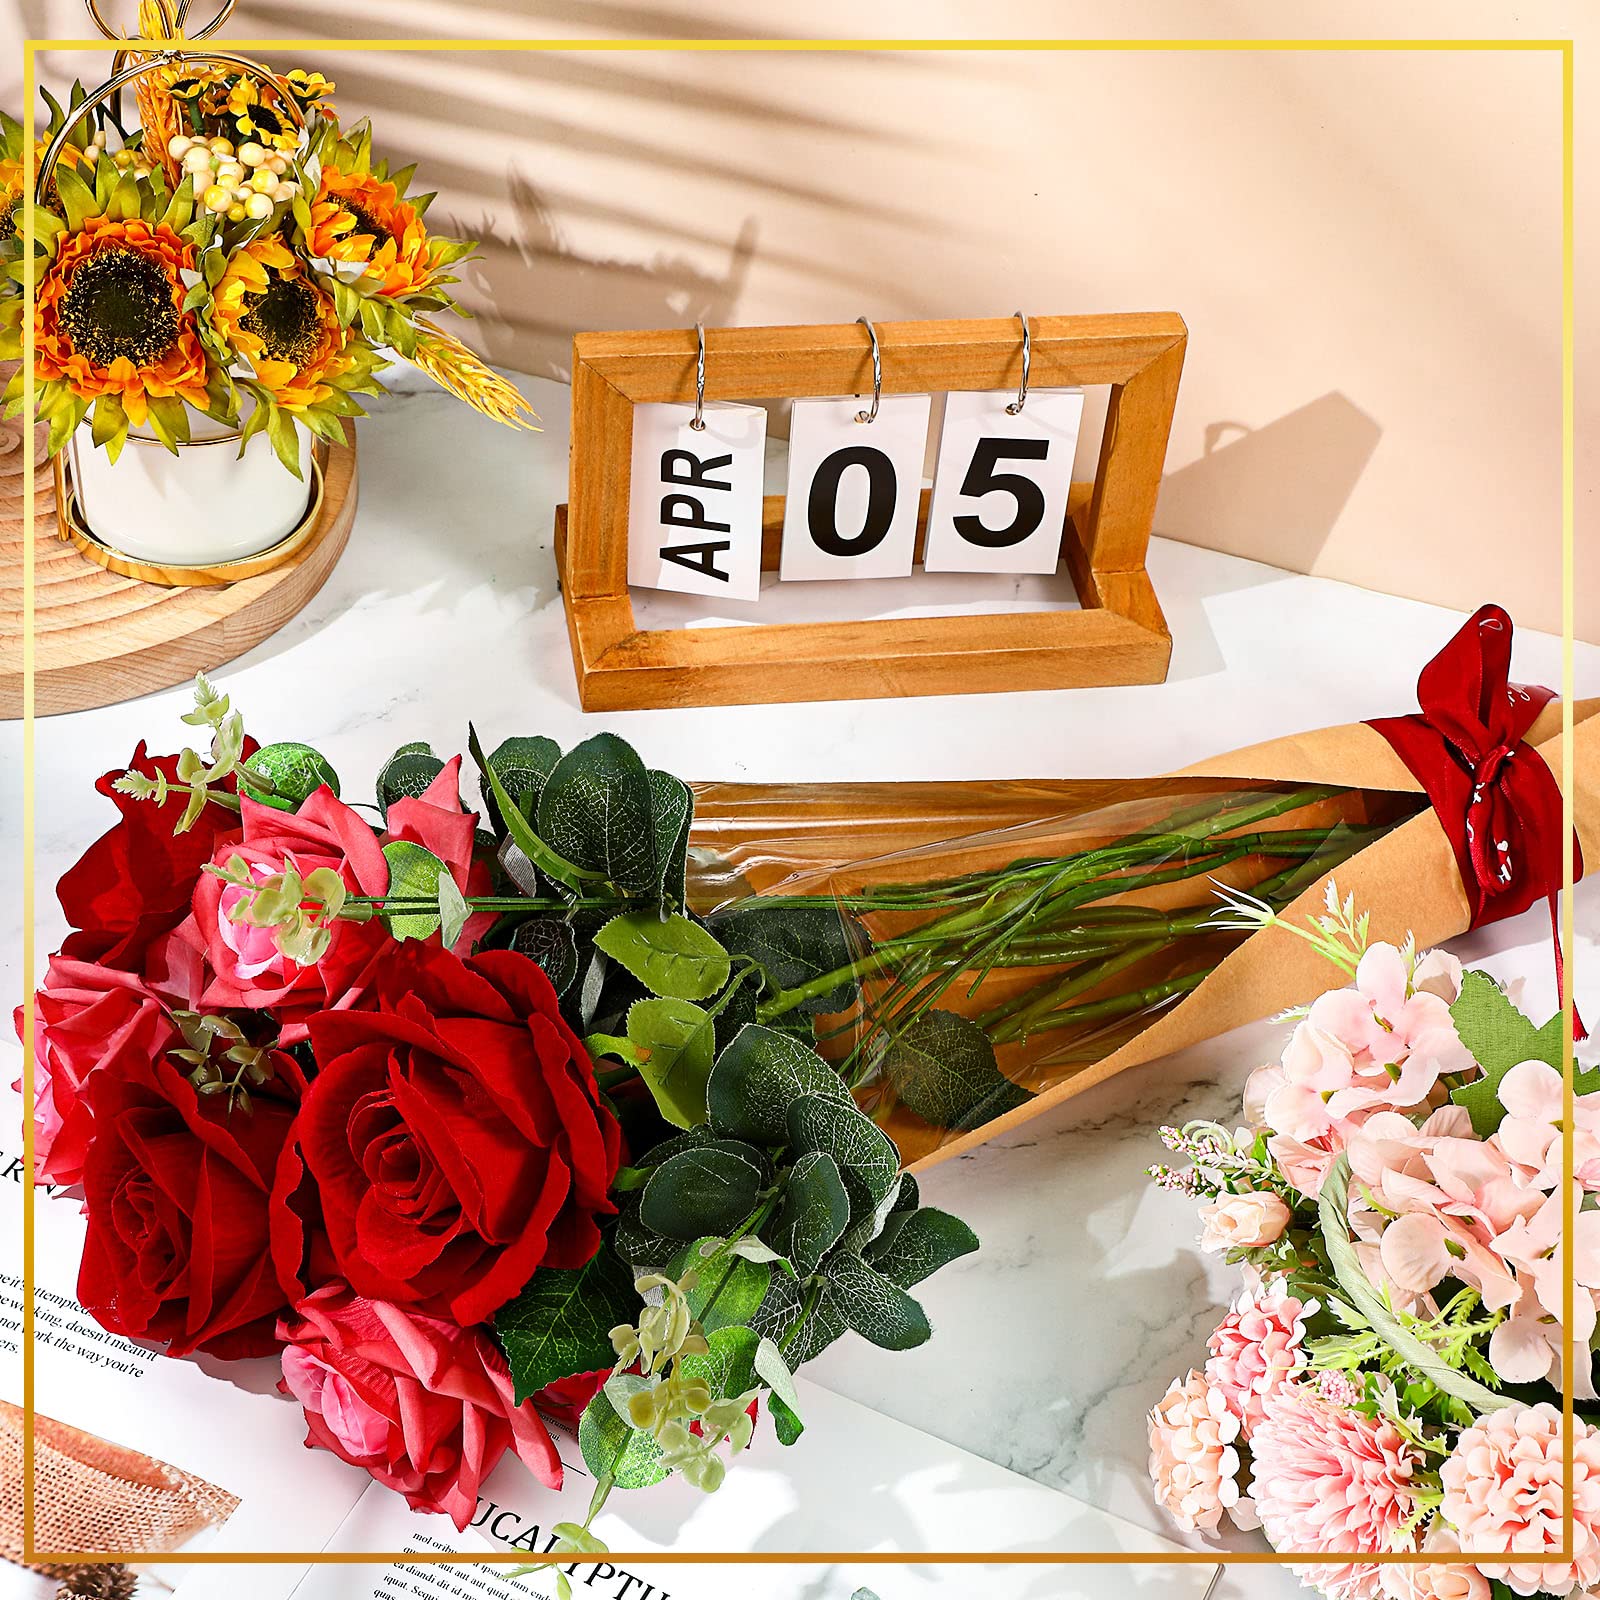 100 Pcs Flower Bouquet Wrapping Paper Flower Rose Sleeves Bulk Flower Bags for Bridal Shower Wedding Graduation Anniversary Birthday Mother's Day (24.8